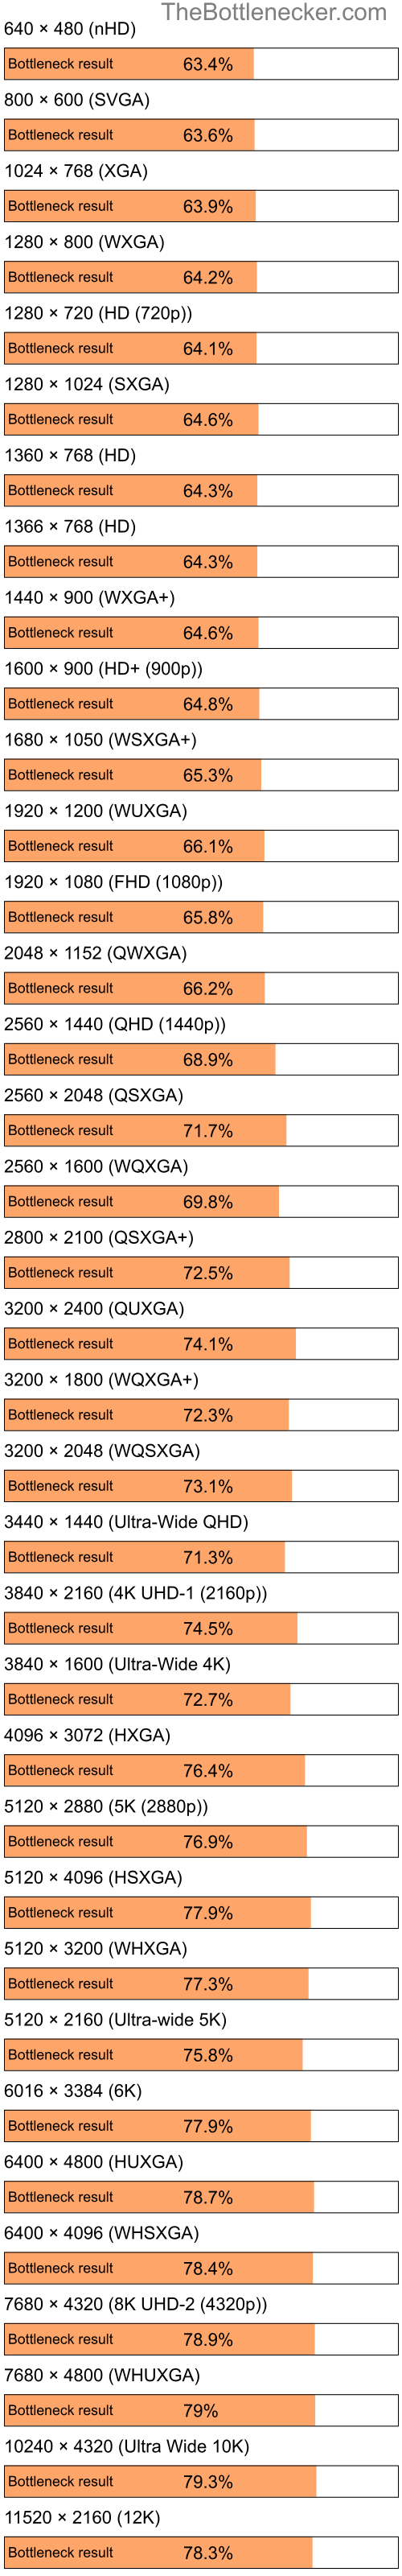 Bottleneck results by resolution for Intel Pentium 4 and NVIDIA GeForce 9300M GS in General Tasks